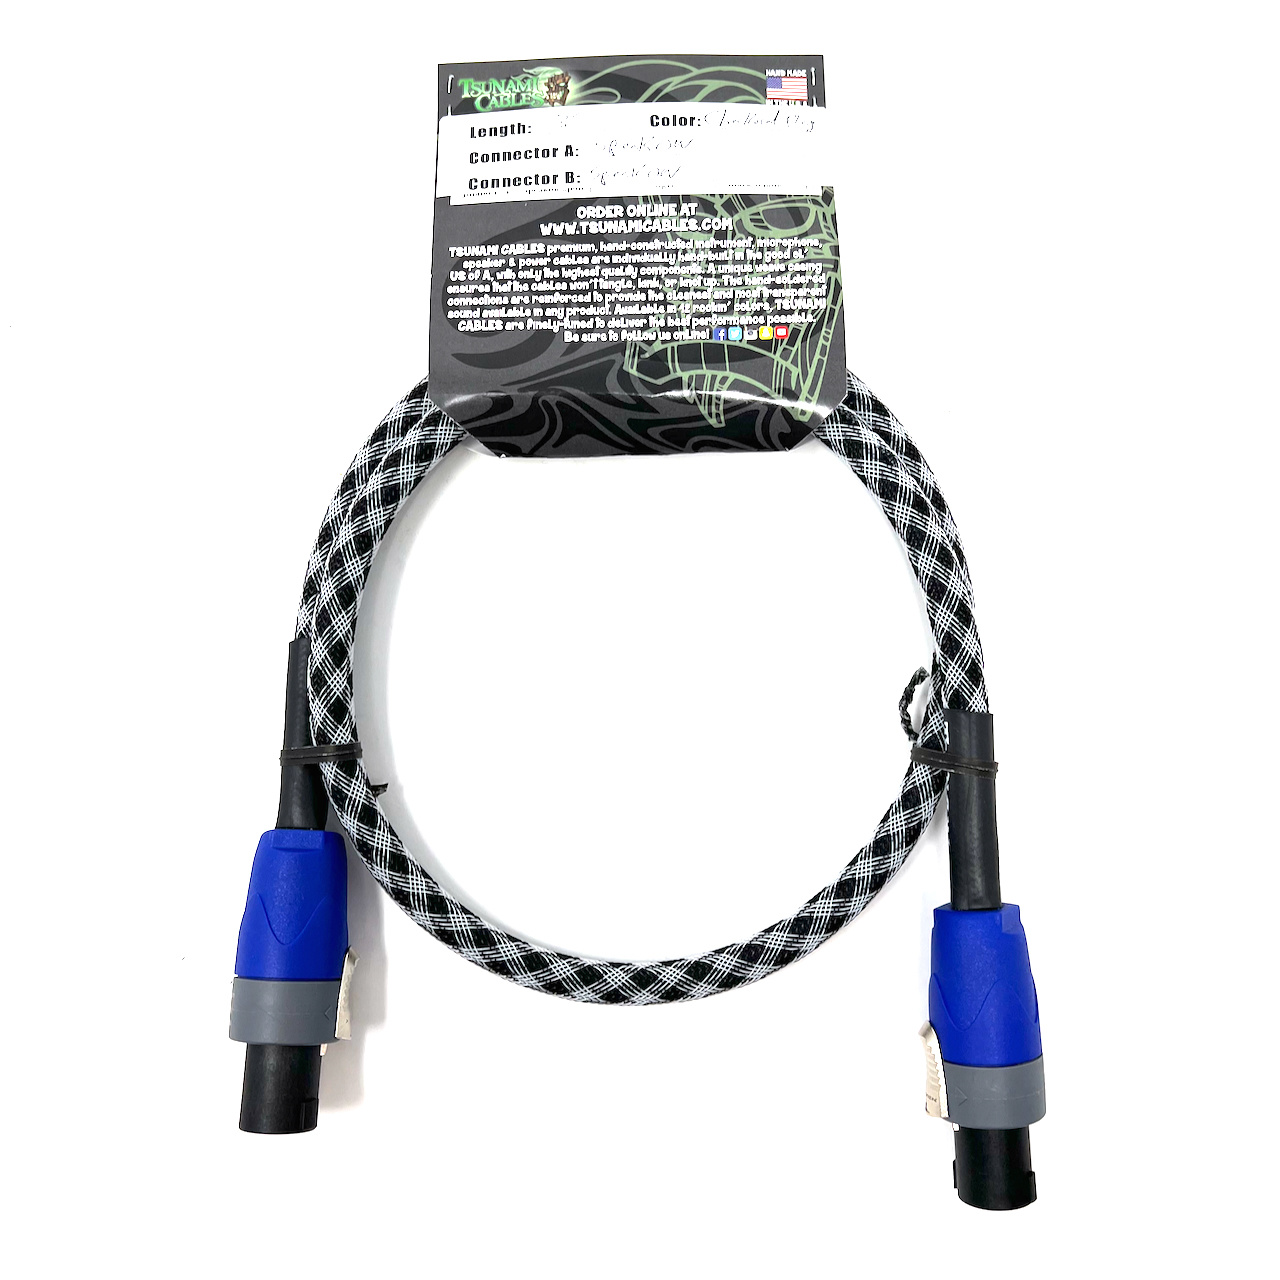 Tsunami Cables 3' Handcrafted Premium Speaker Cable with SpeakON Connectors, "Checkered Flag" (black/white)